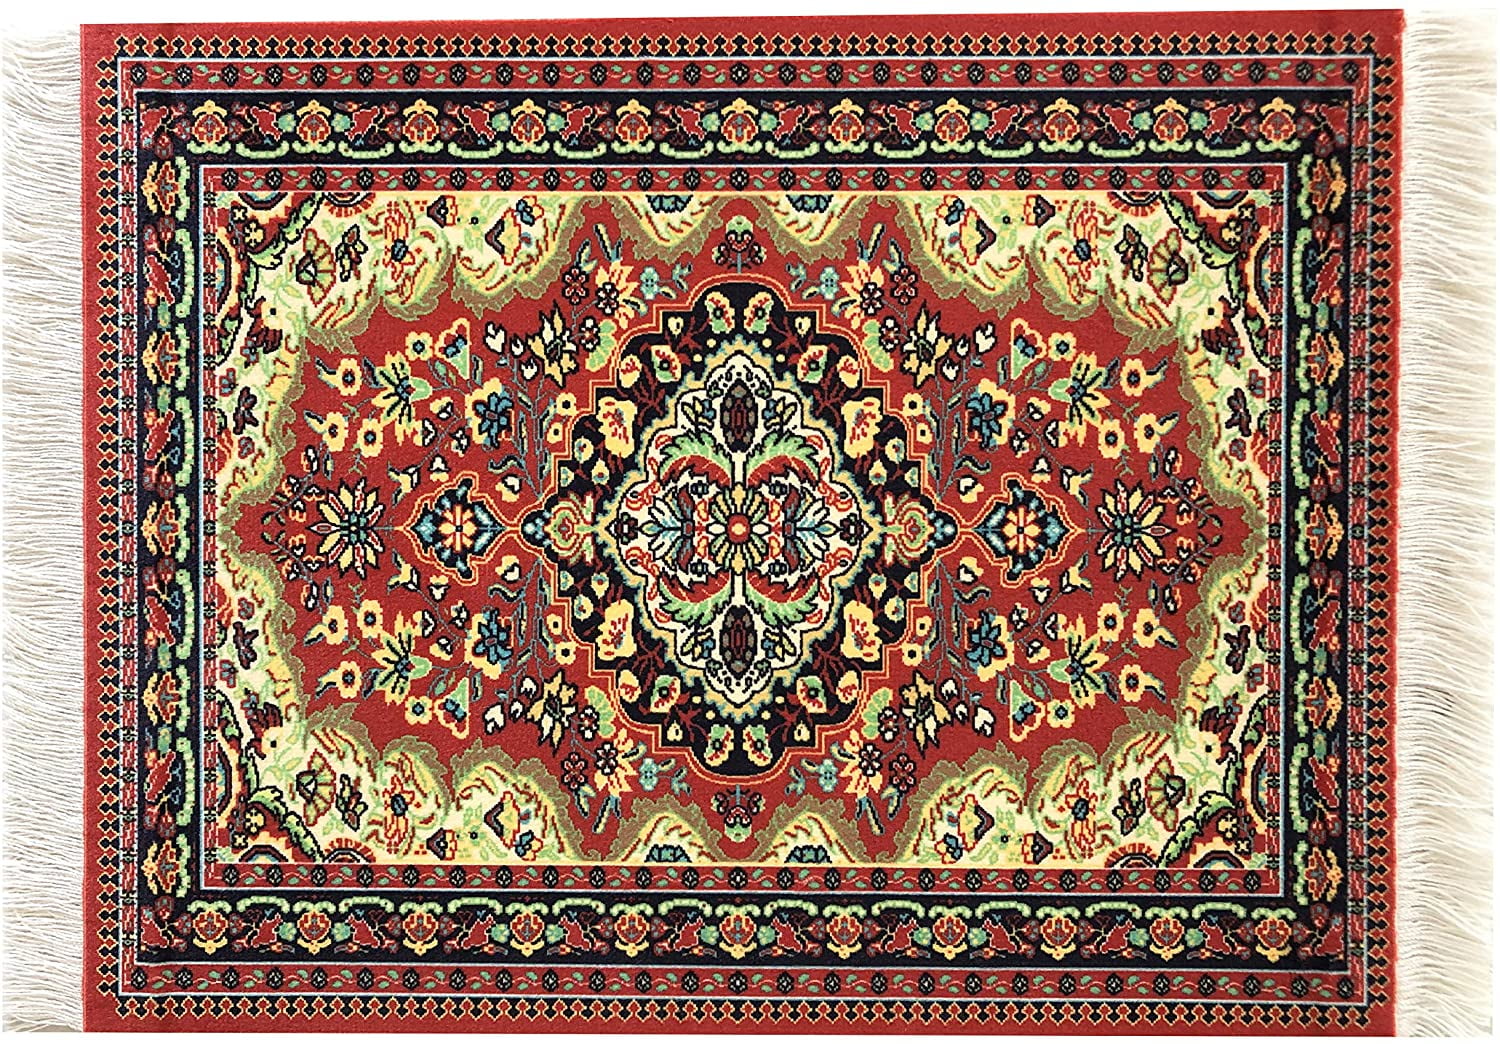 Turkish Style Carpet Mousemat Pattern 1 Great Gift Oriental Rug Mouse Pad 